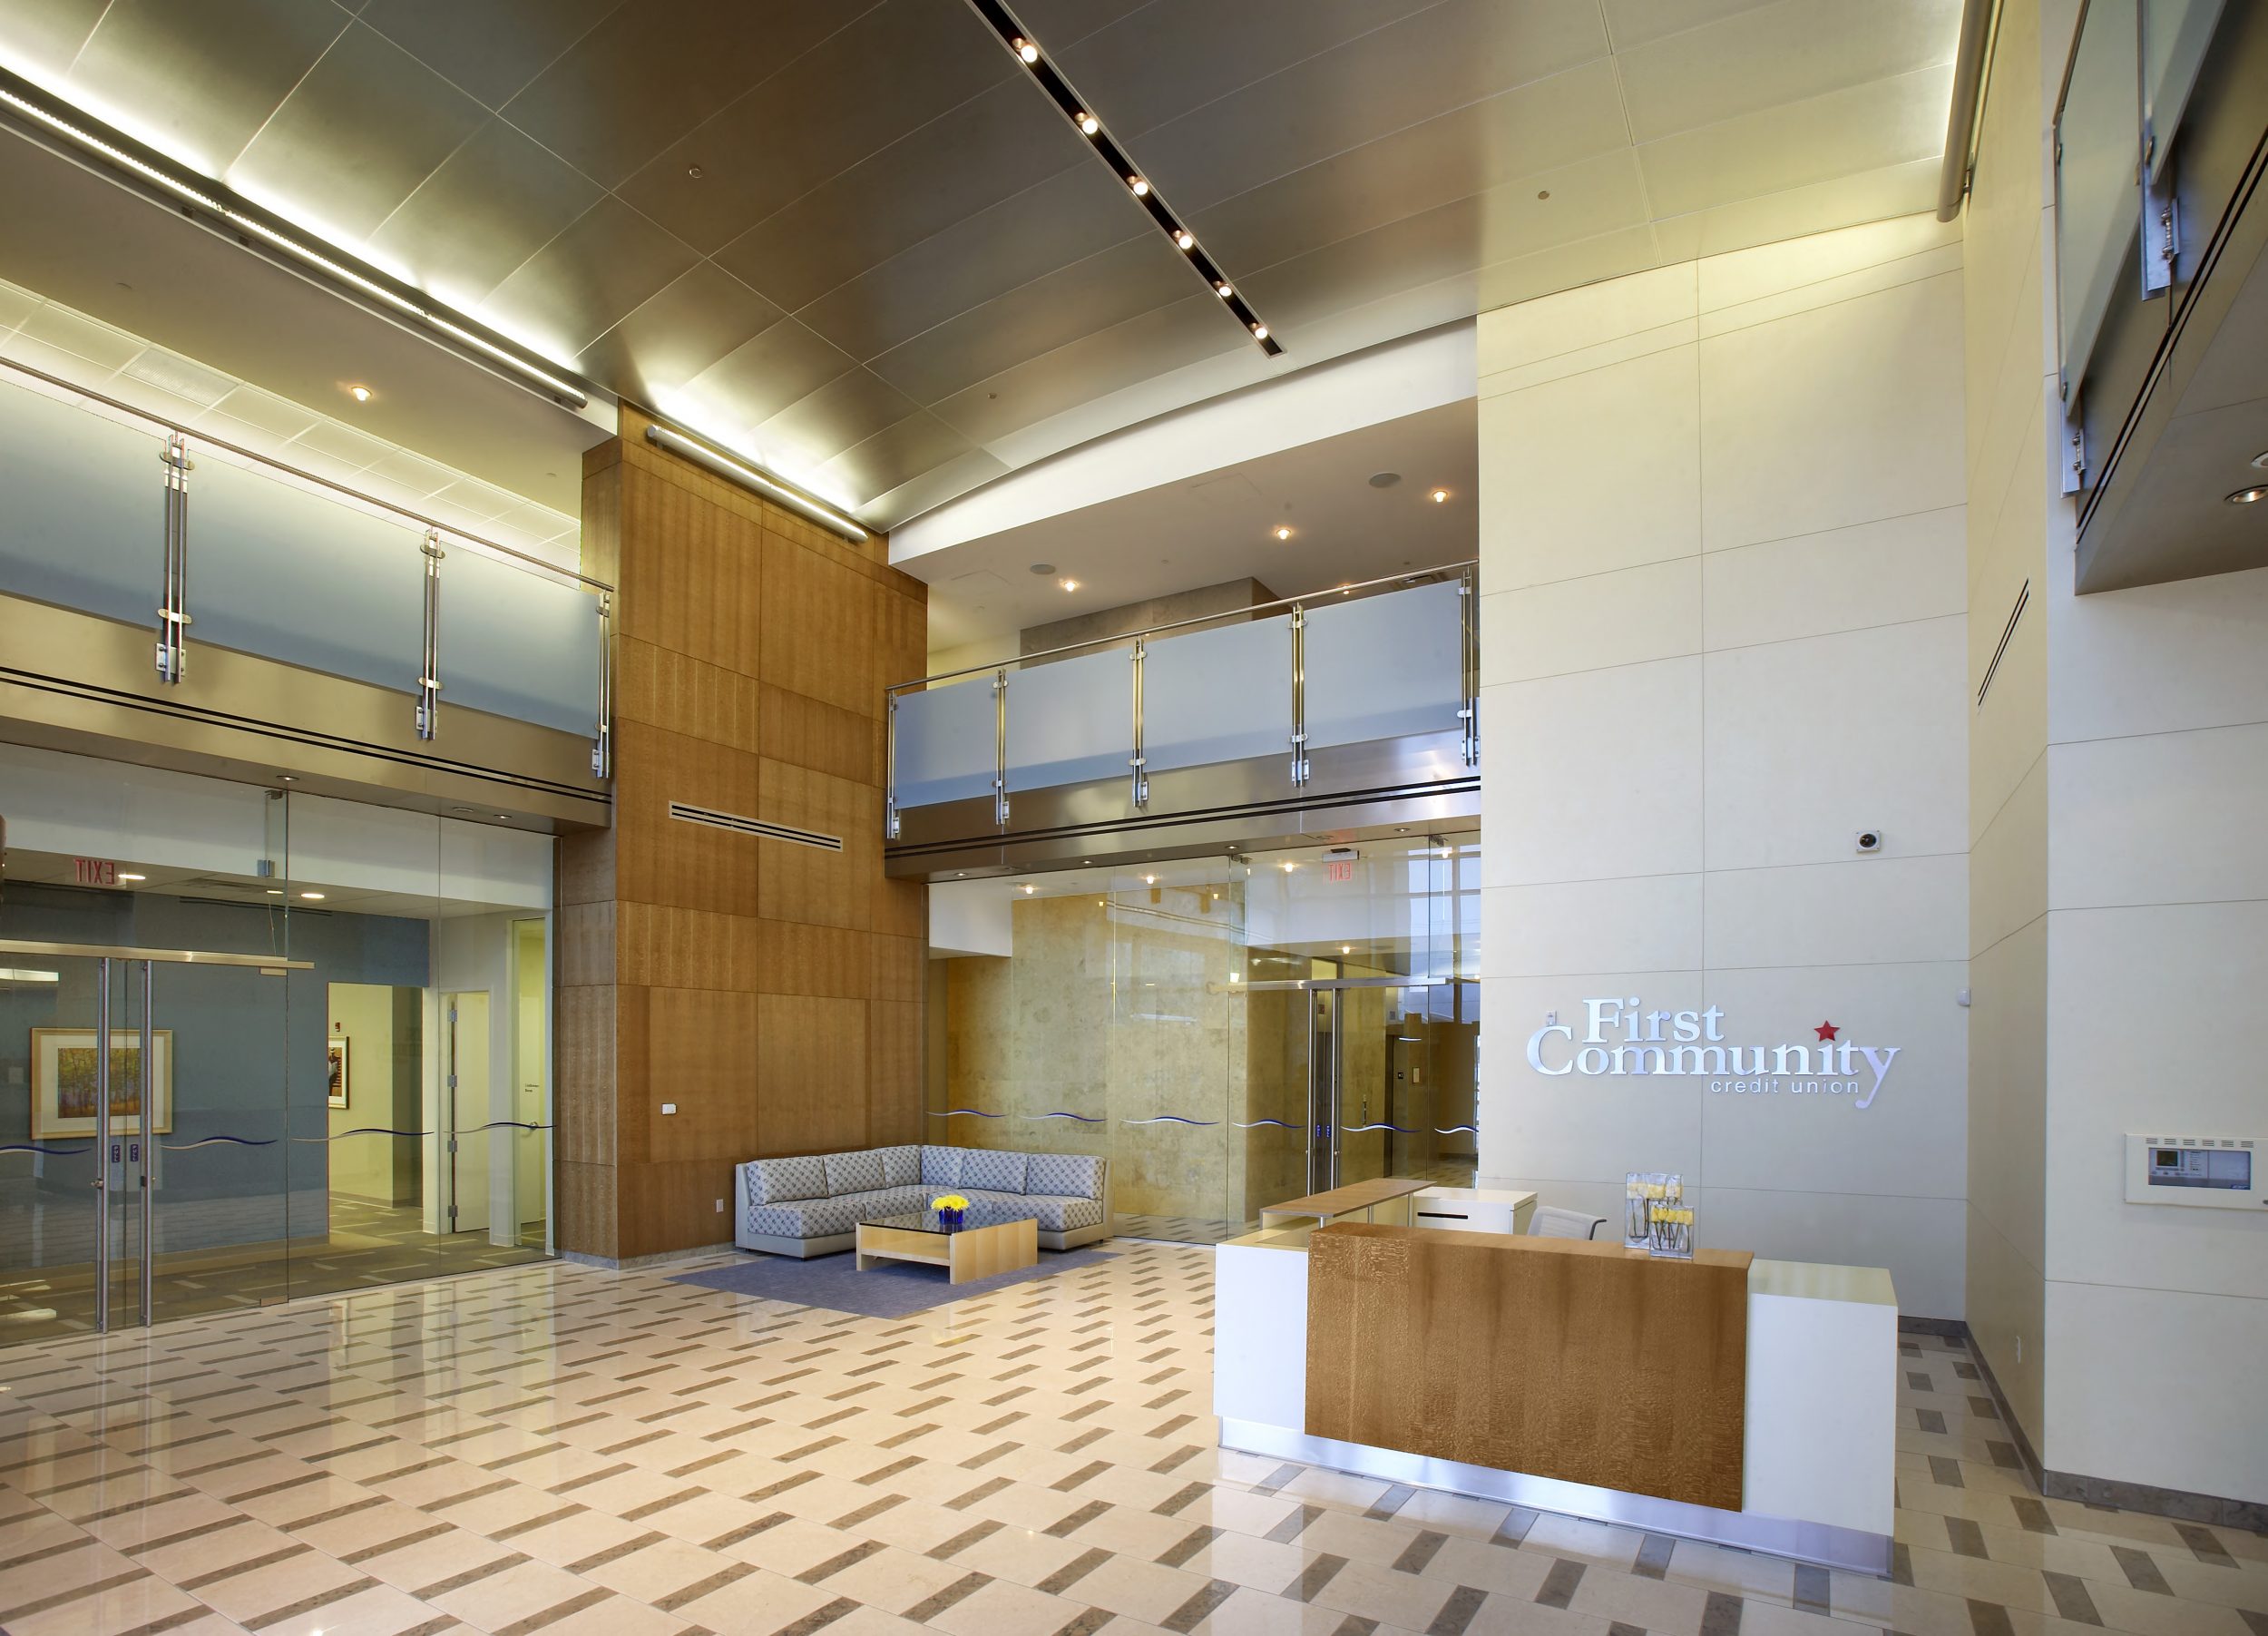 First Community Credit Union | TR,i Architects St. Louis